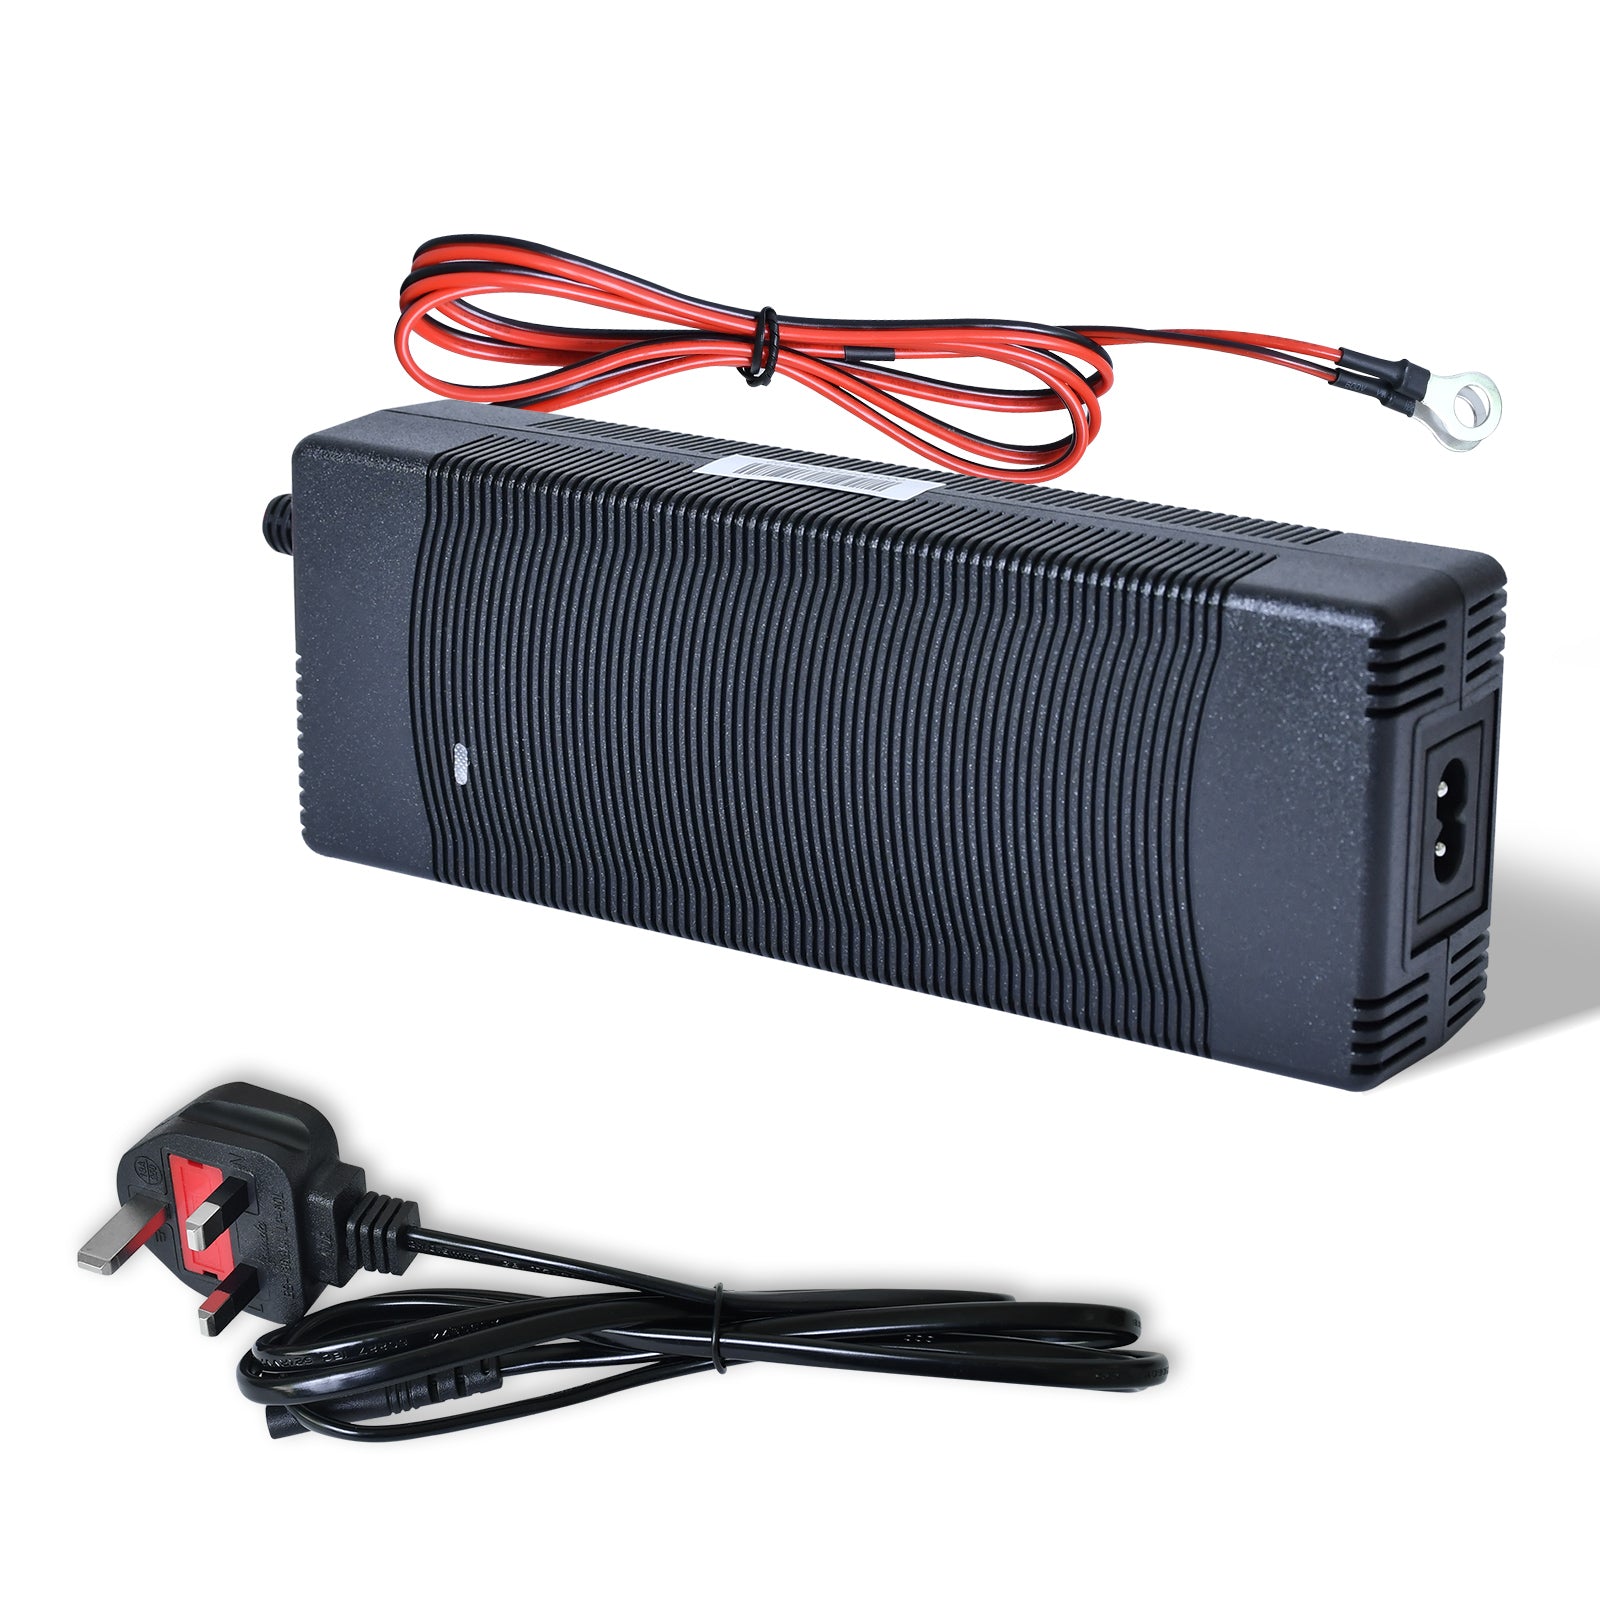 dchouse_12V_10A_LiFePO4_portable_battery_charger_1